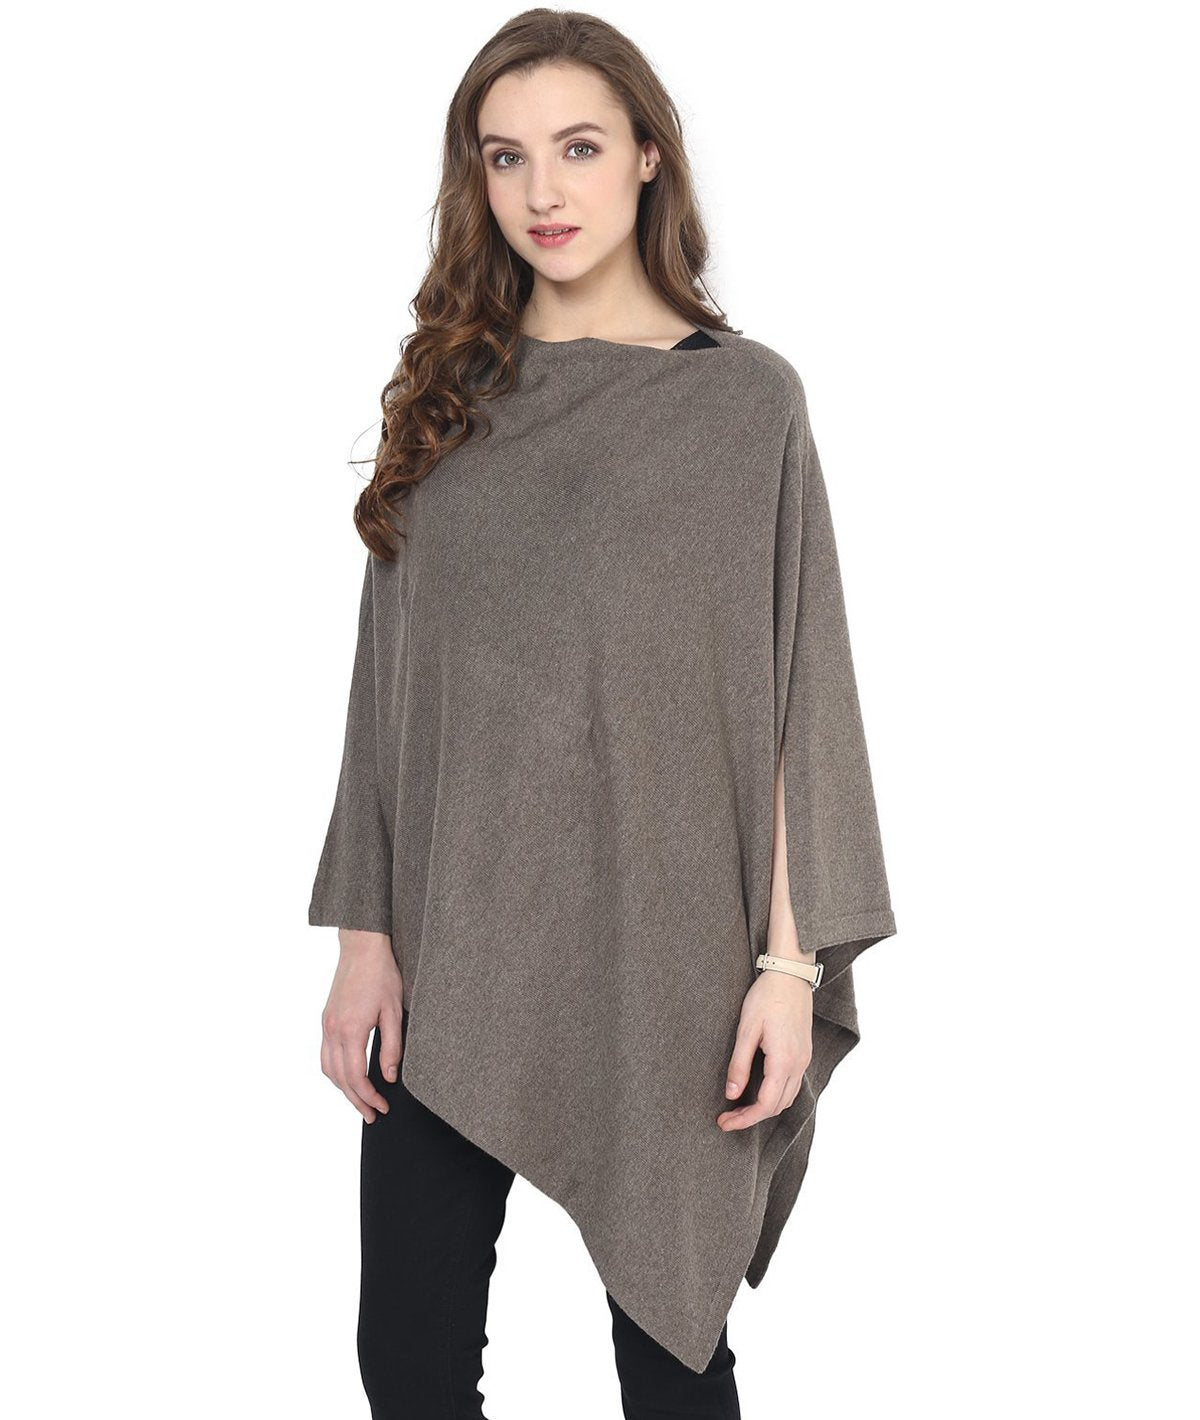 Rosette - Brown Cotton Knitted Fashion Poncho / Top / Cape